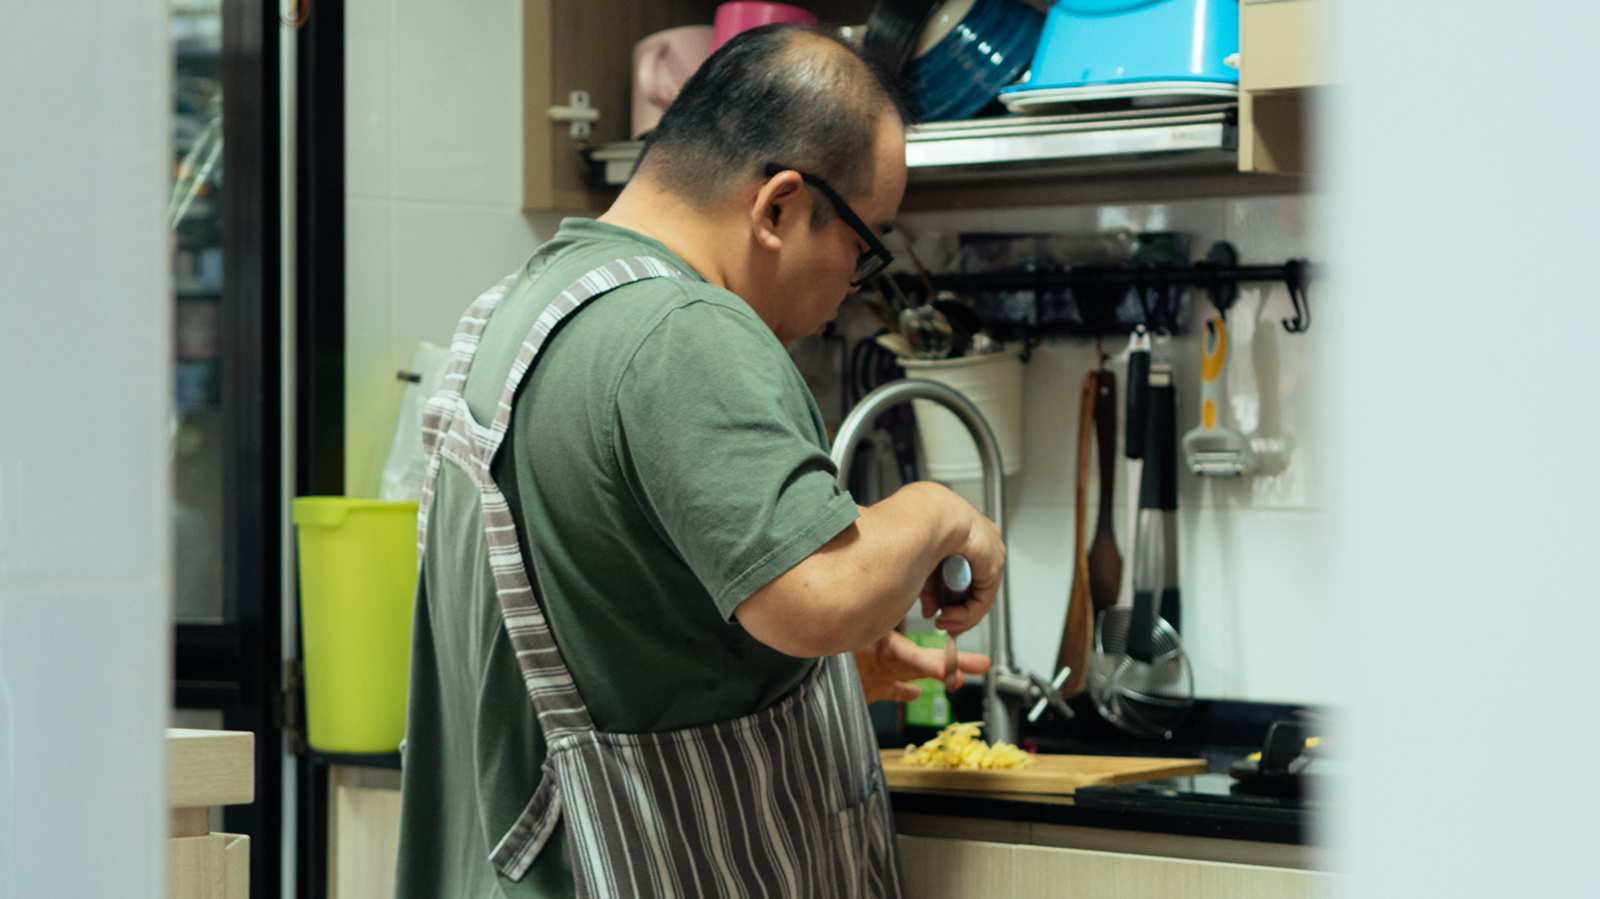 He shares his love for cooking by making home-cooked meals for his neighbours